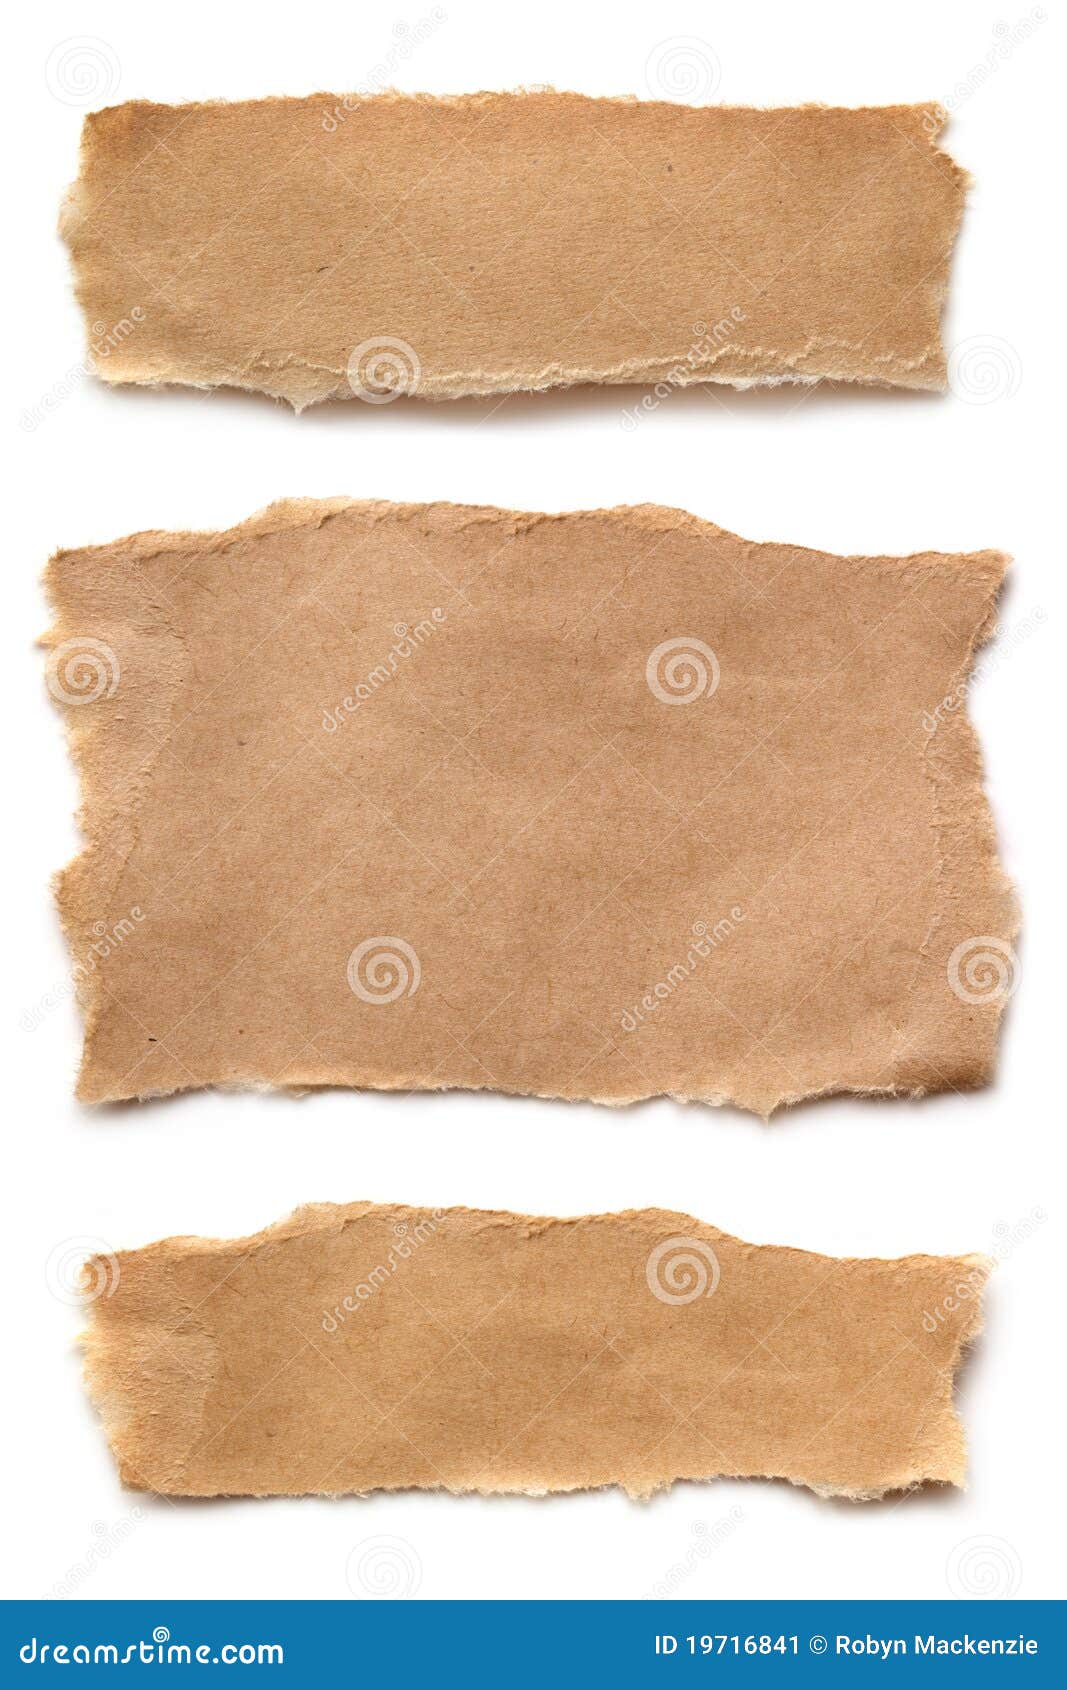 ripped brown paper